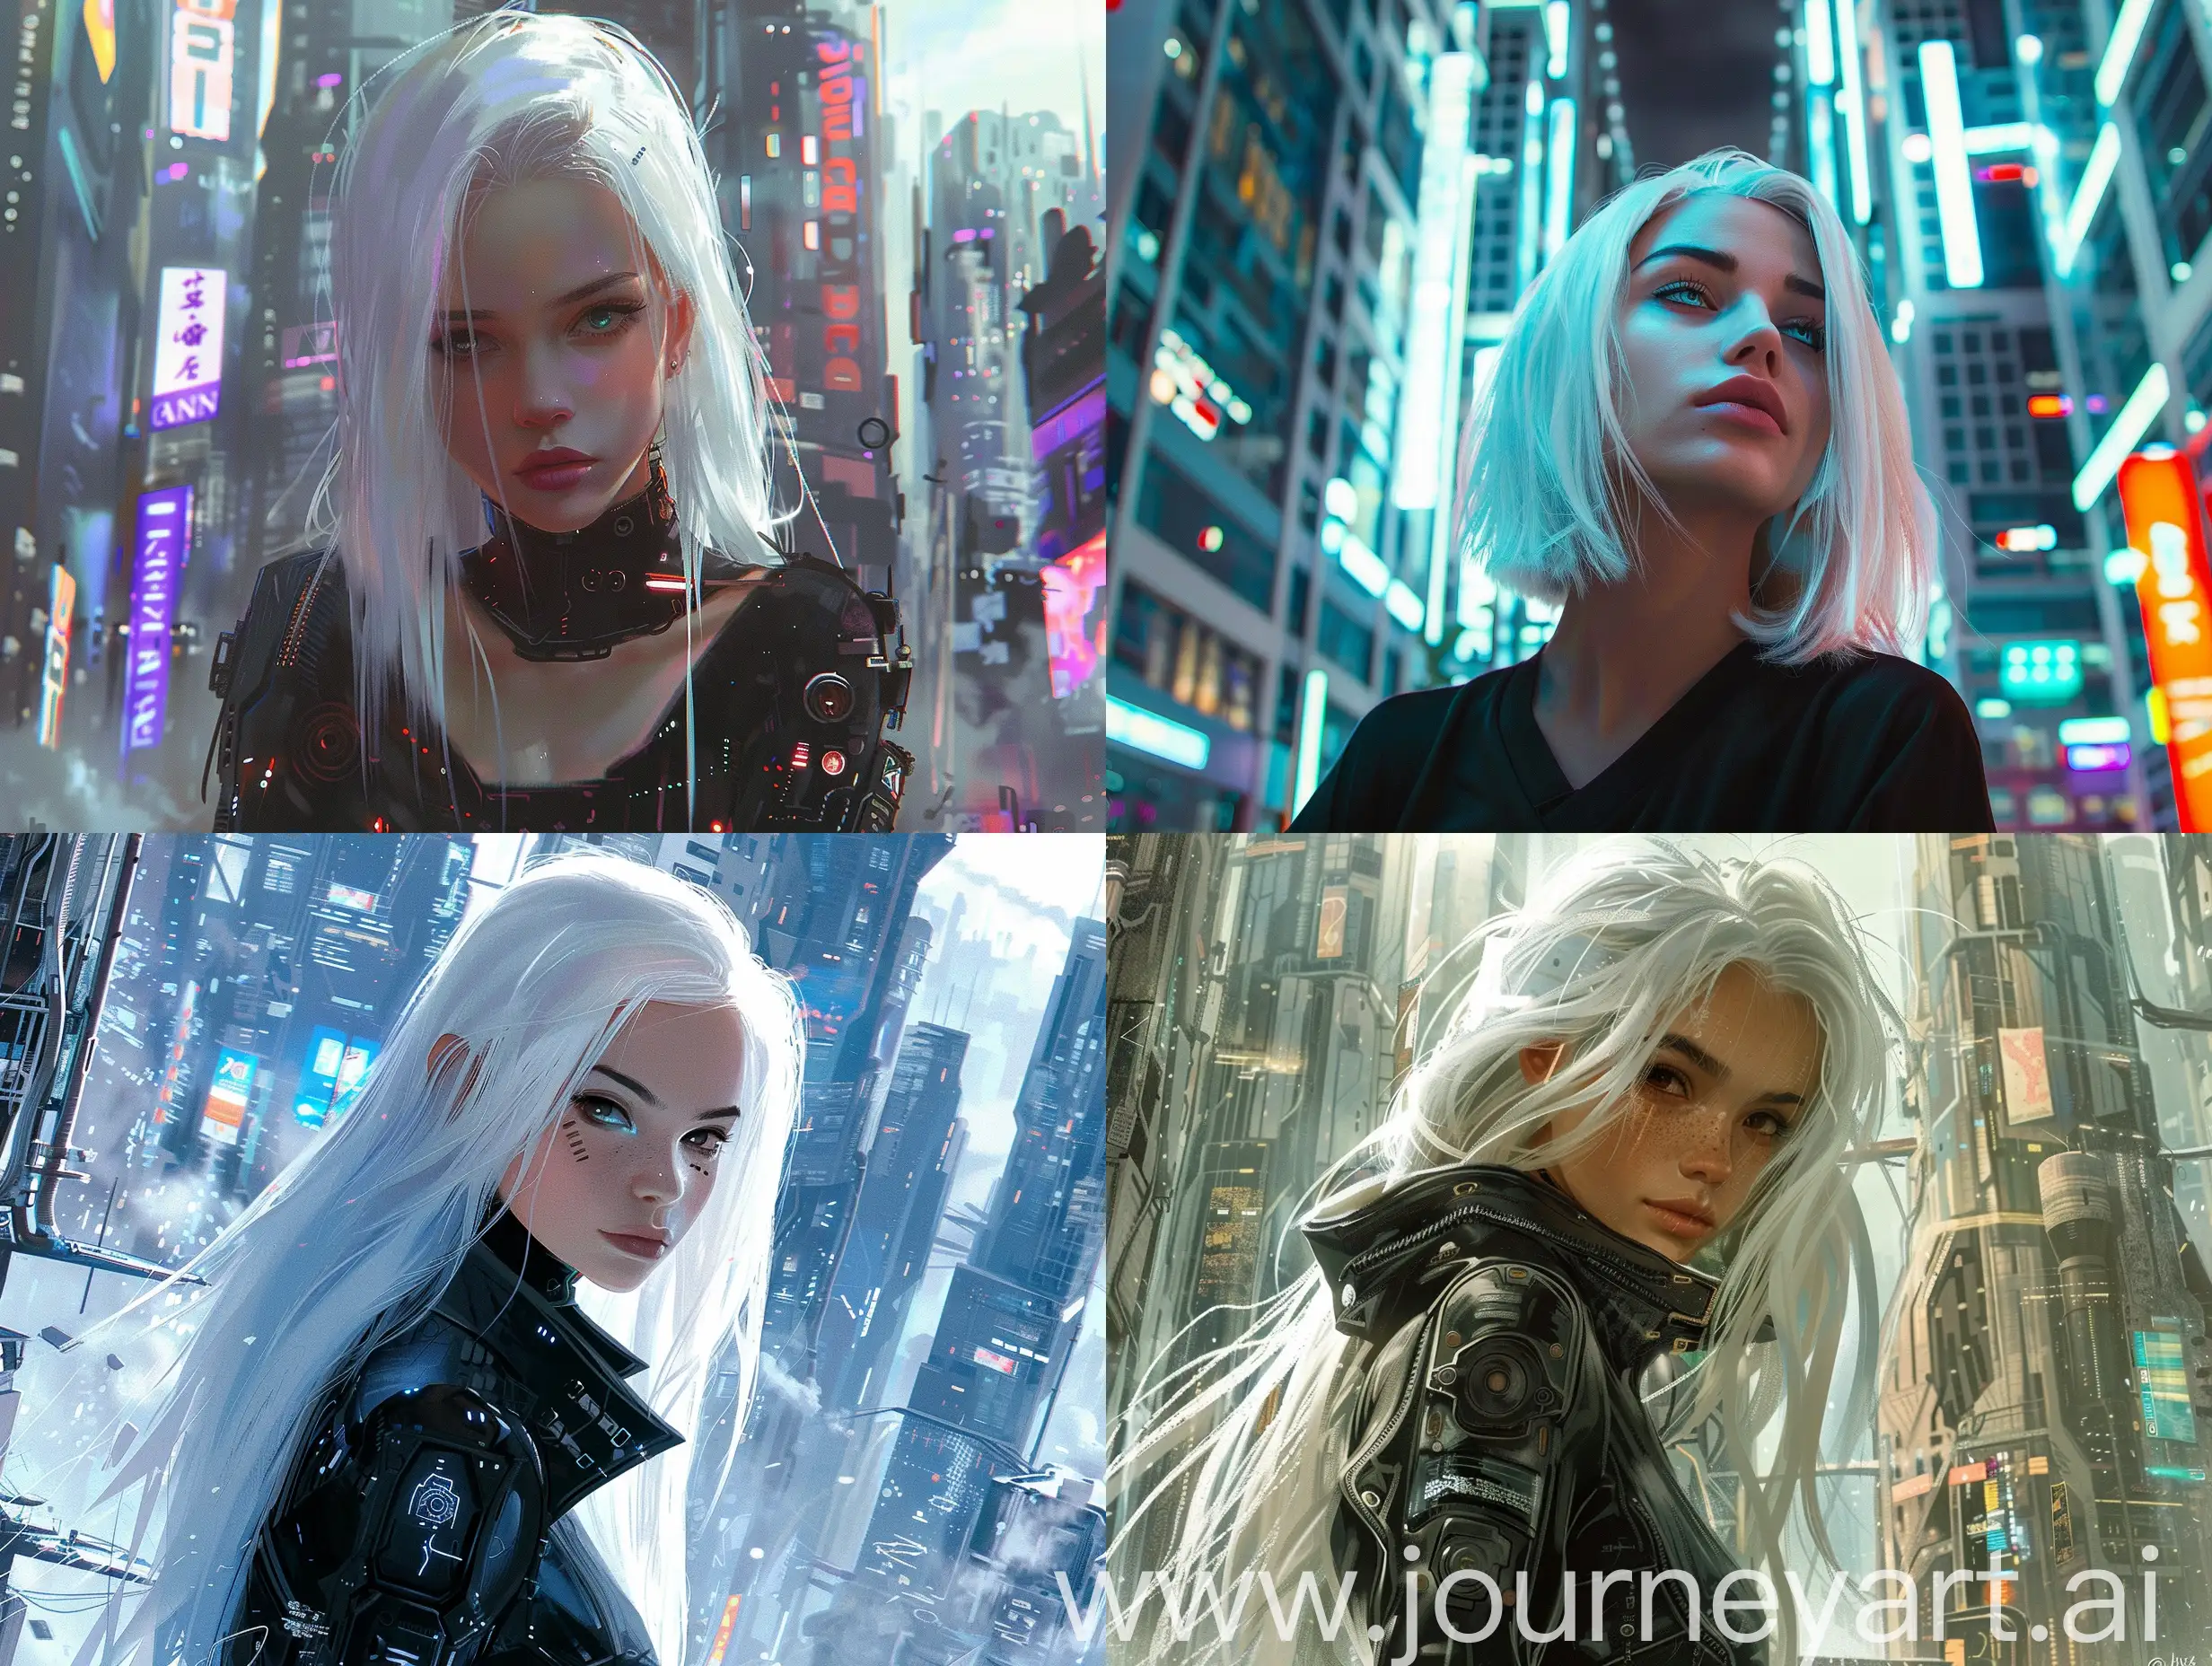 Futuristic-Cyberpunk-Portrait-of-a-Stunning-WhiteHaired-Girl-amid-Cityscape